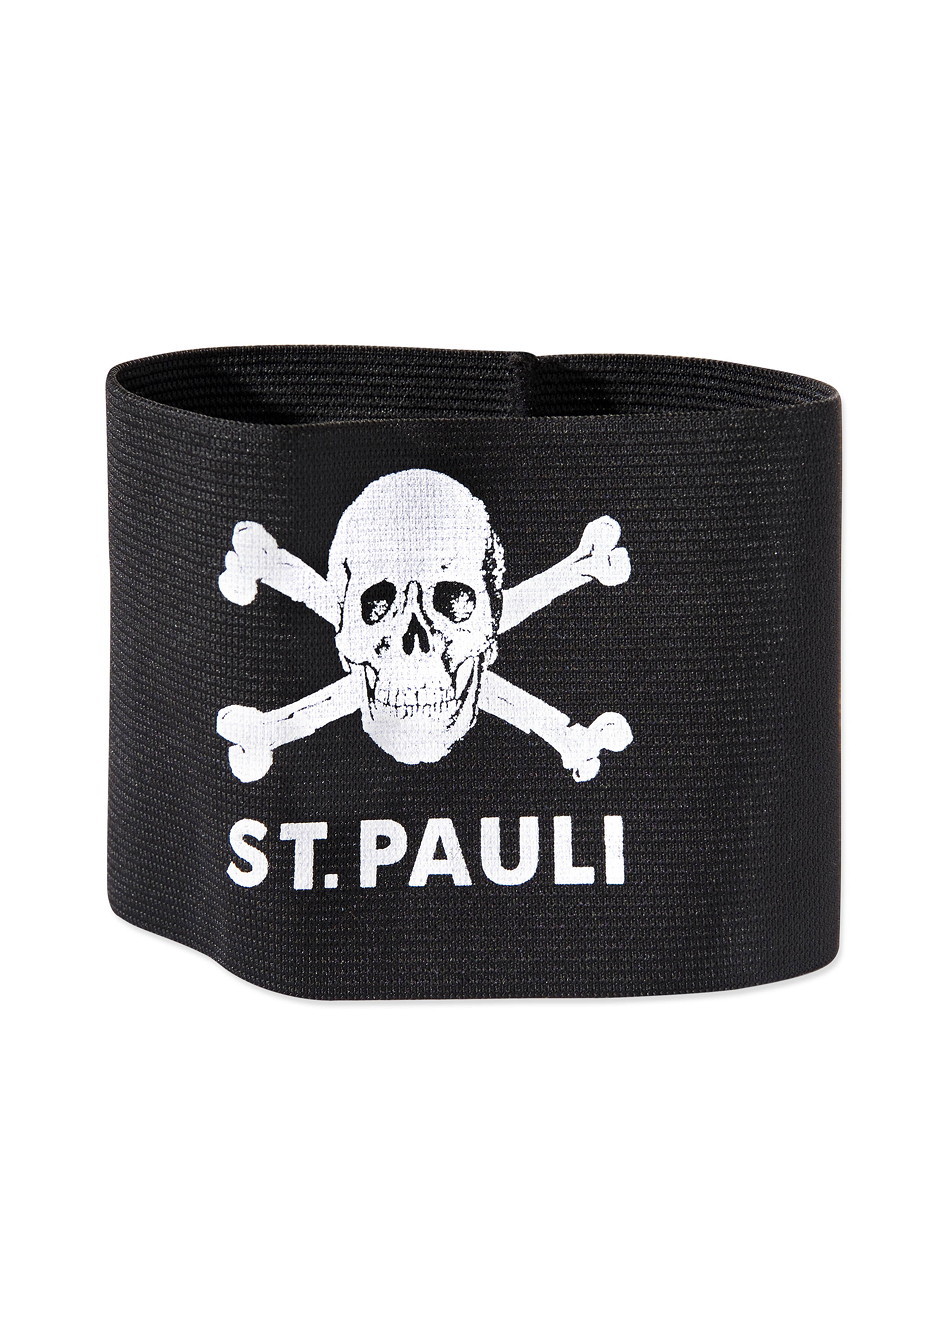 Skull and crossbones captains band